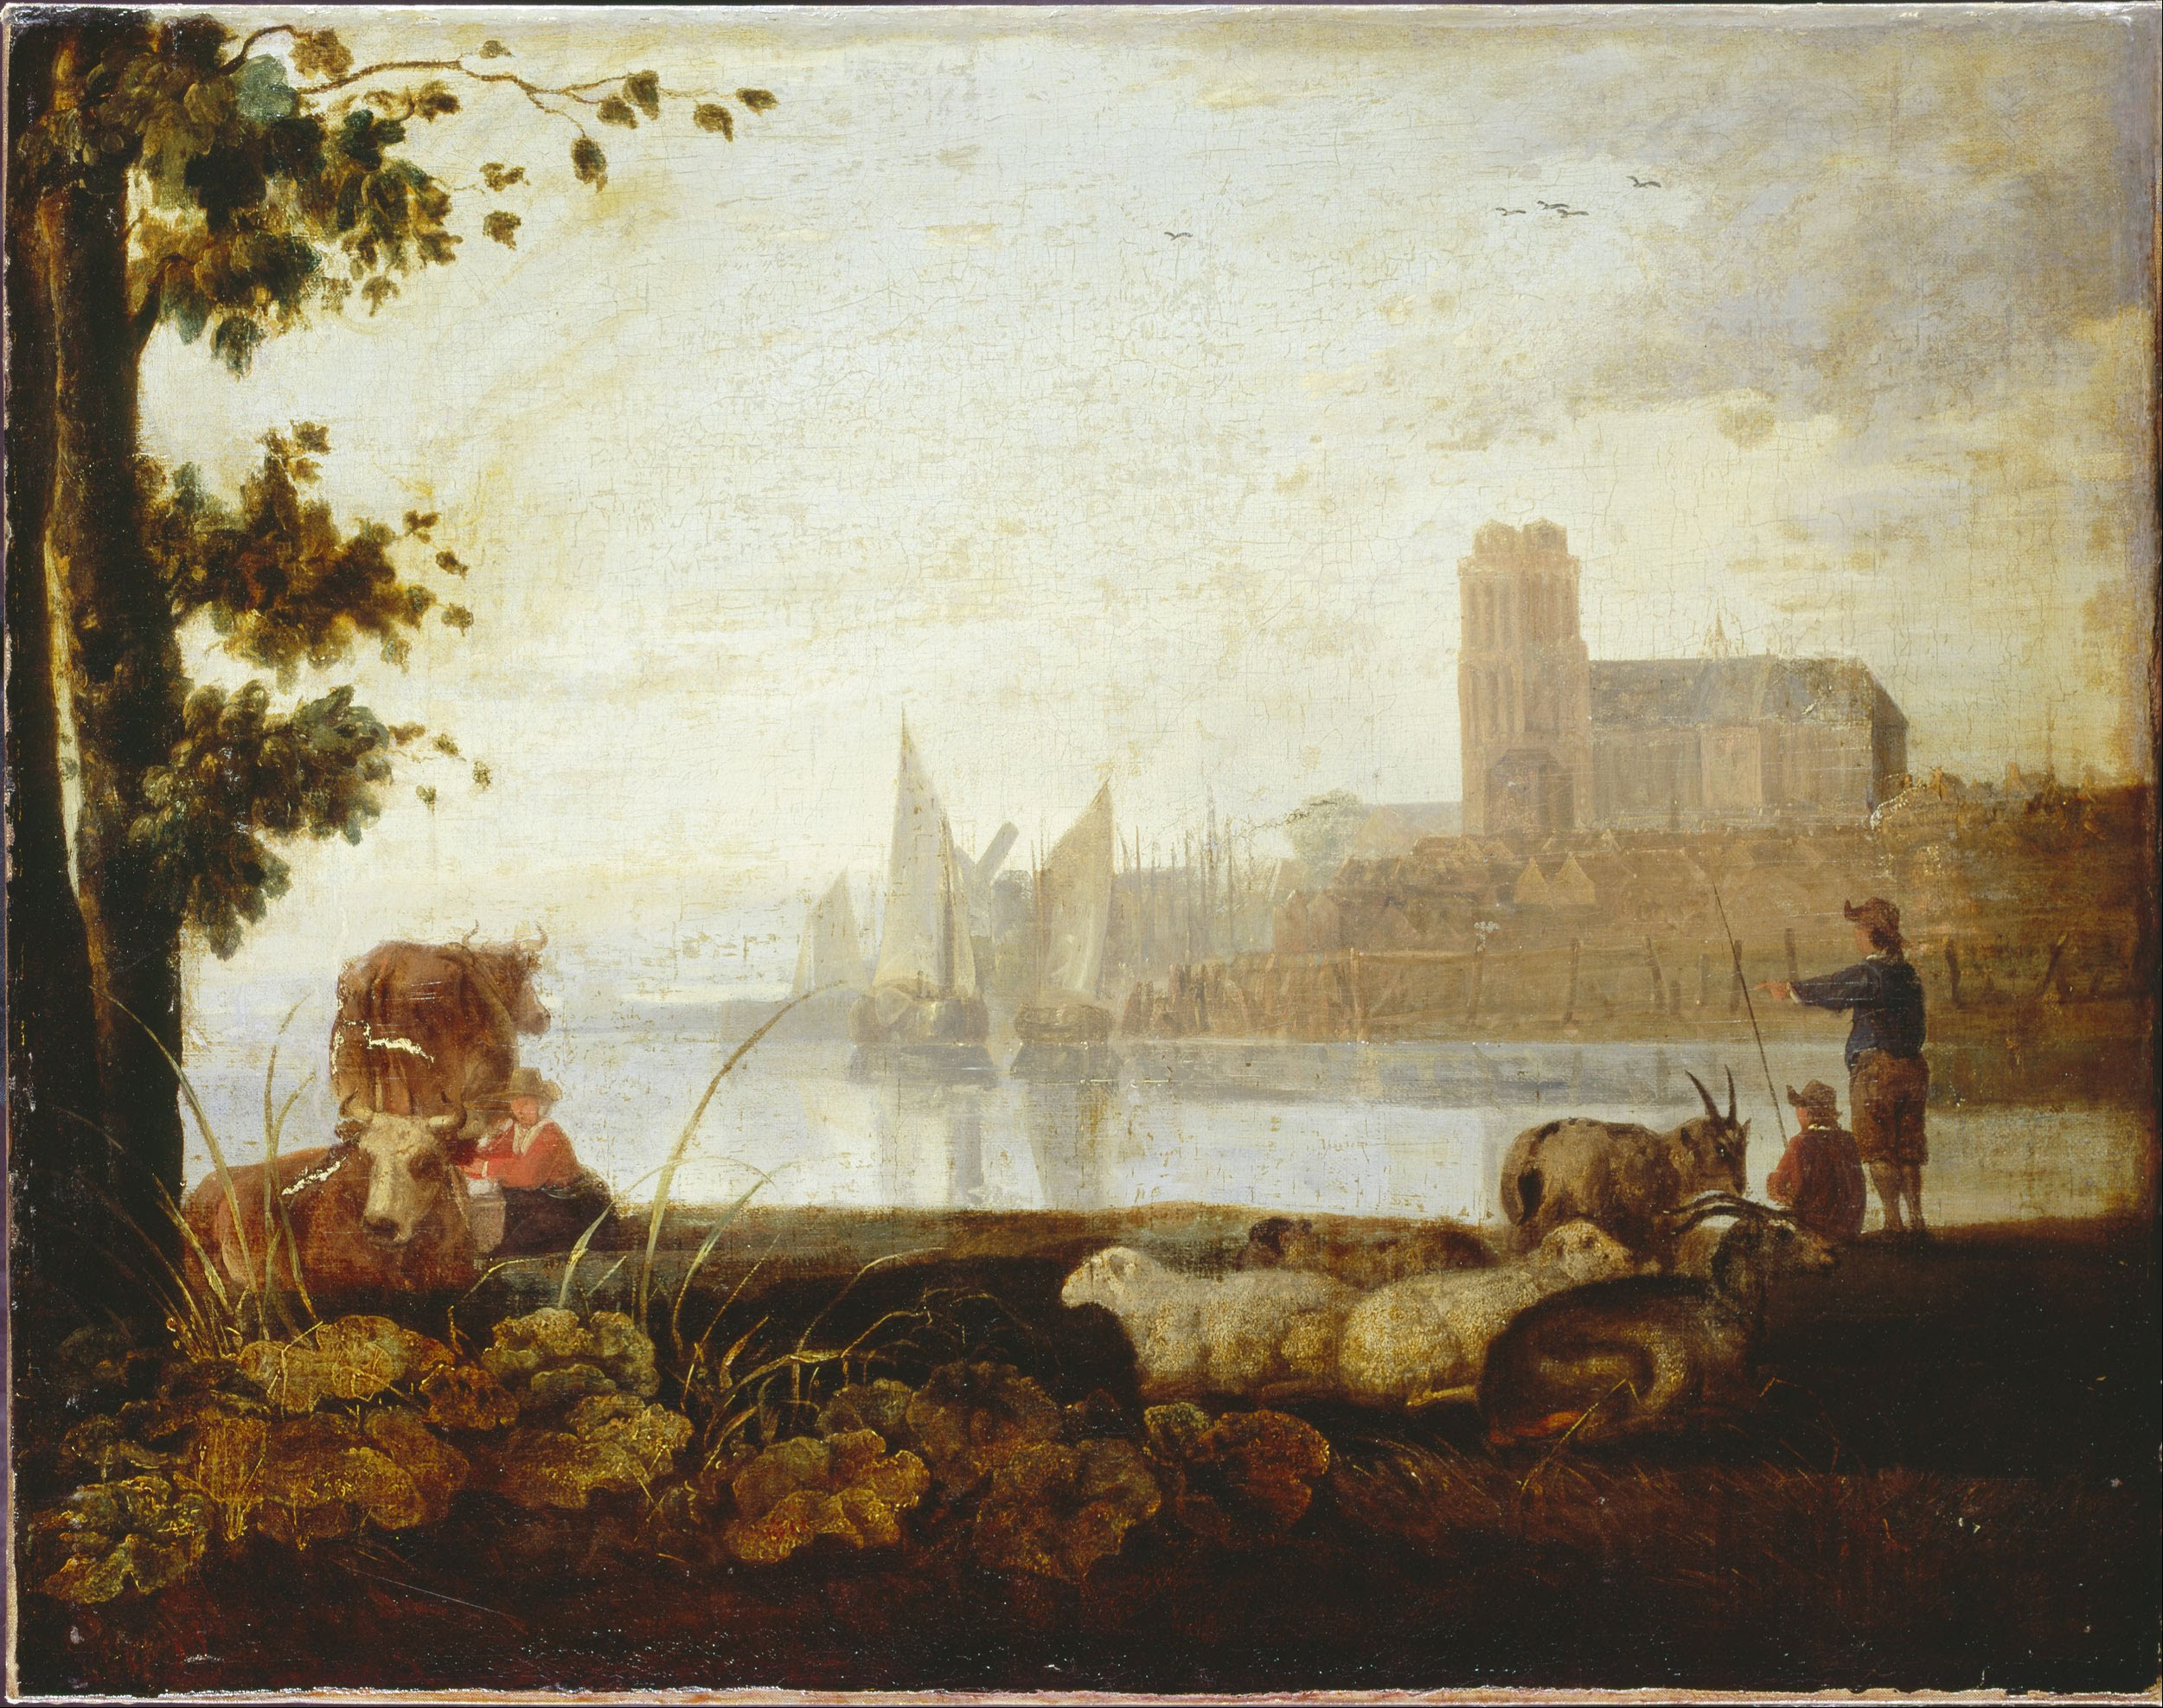 Cuyp, Aelbert - View on the Maas - Google Art Project